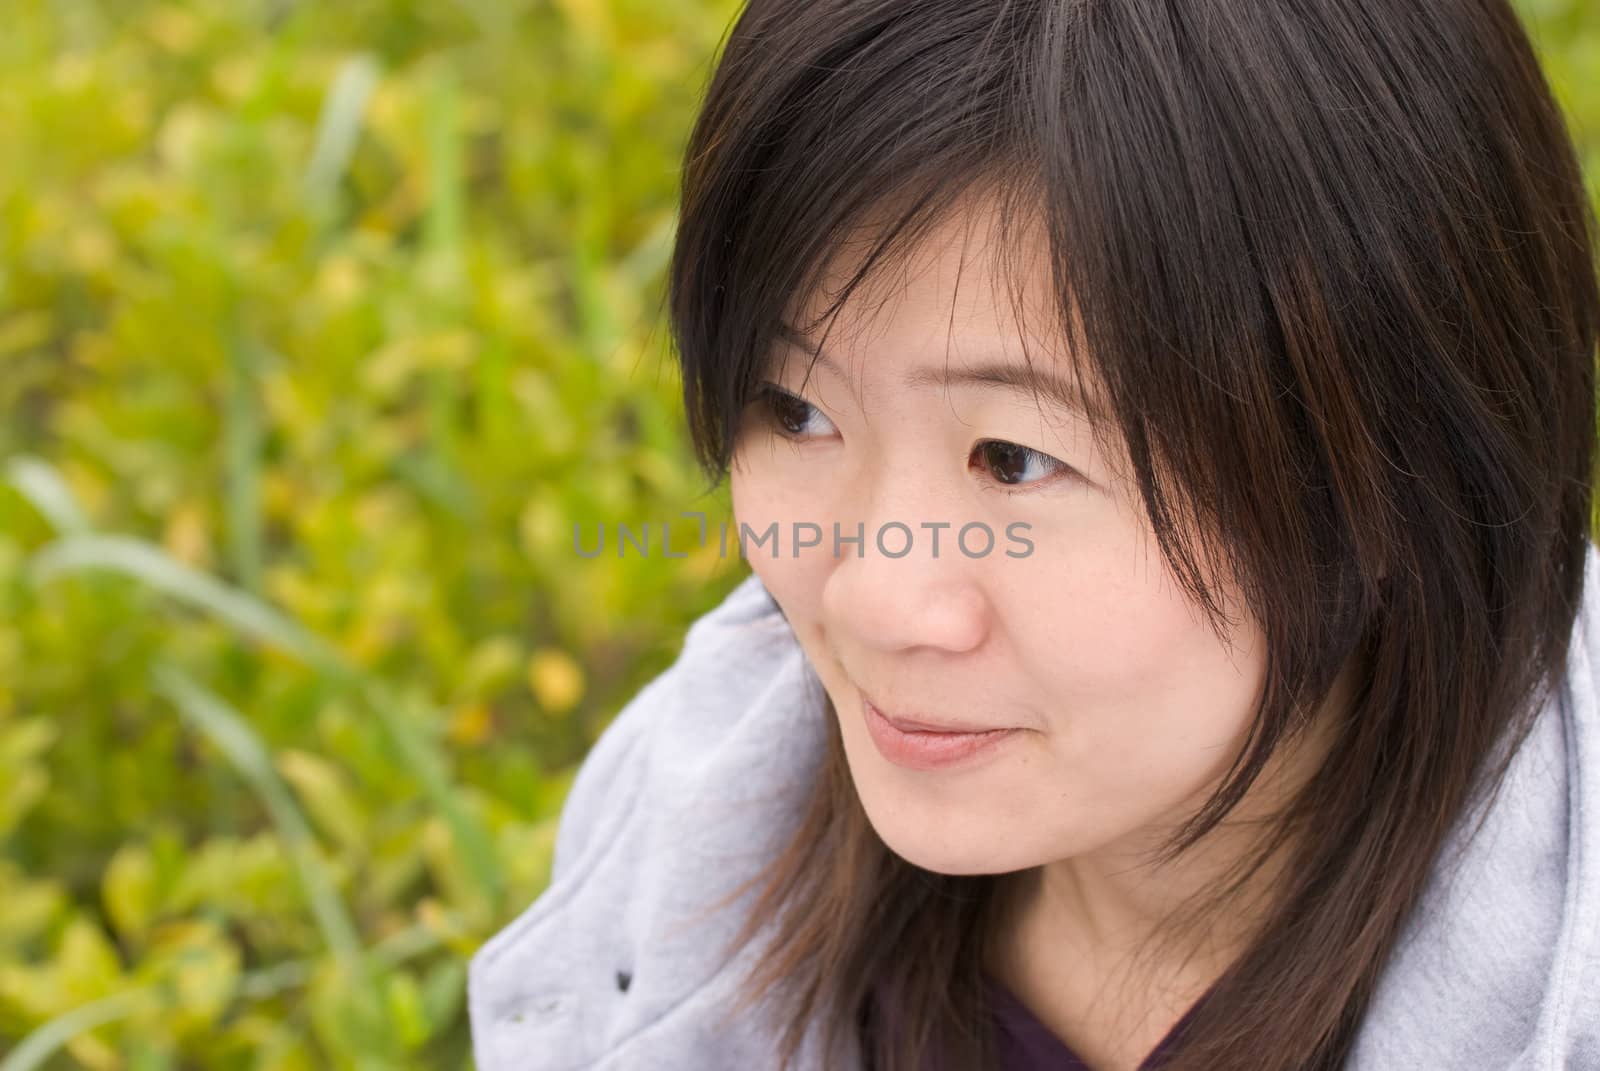 Sweet woman portrait of Asian with fun expression face in outdoor.